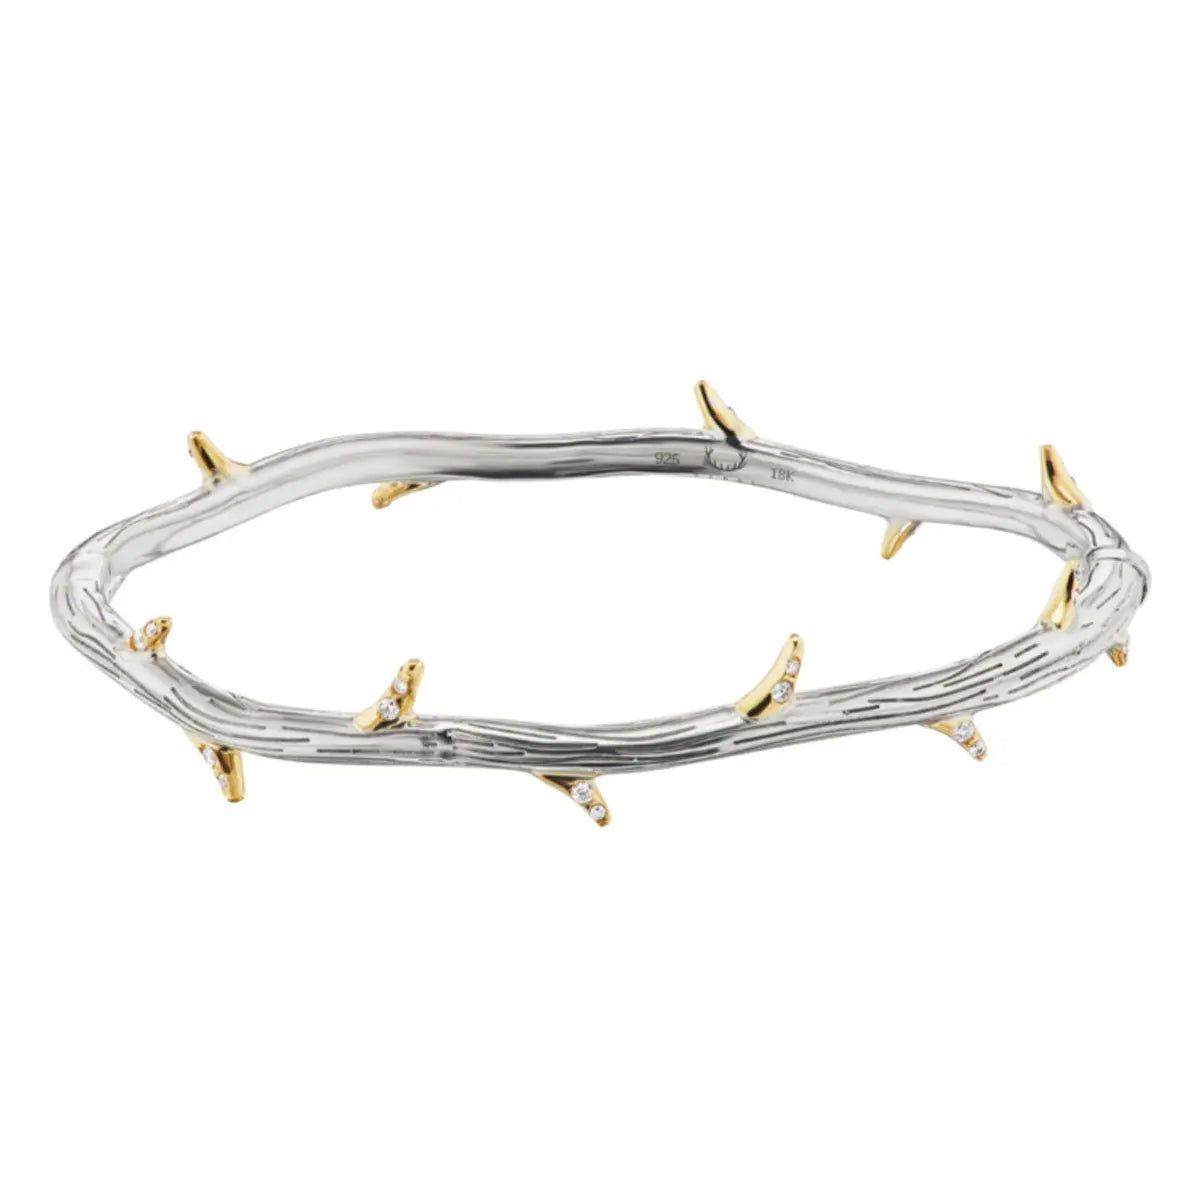 Hinged delicate bangle with 18k yellow gold and diamond thorns with significant carat weight and slightly organic shape.  Designed by Feral Jewelry